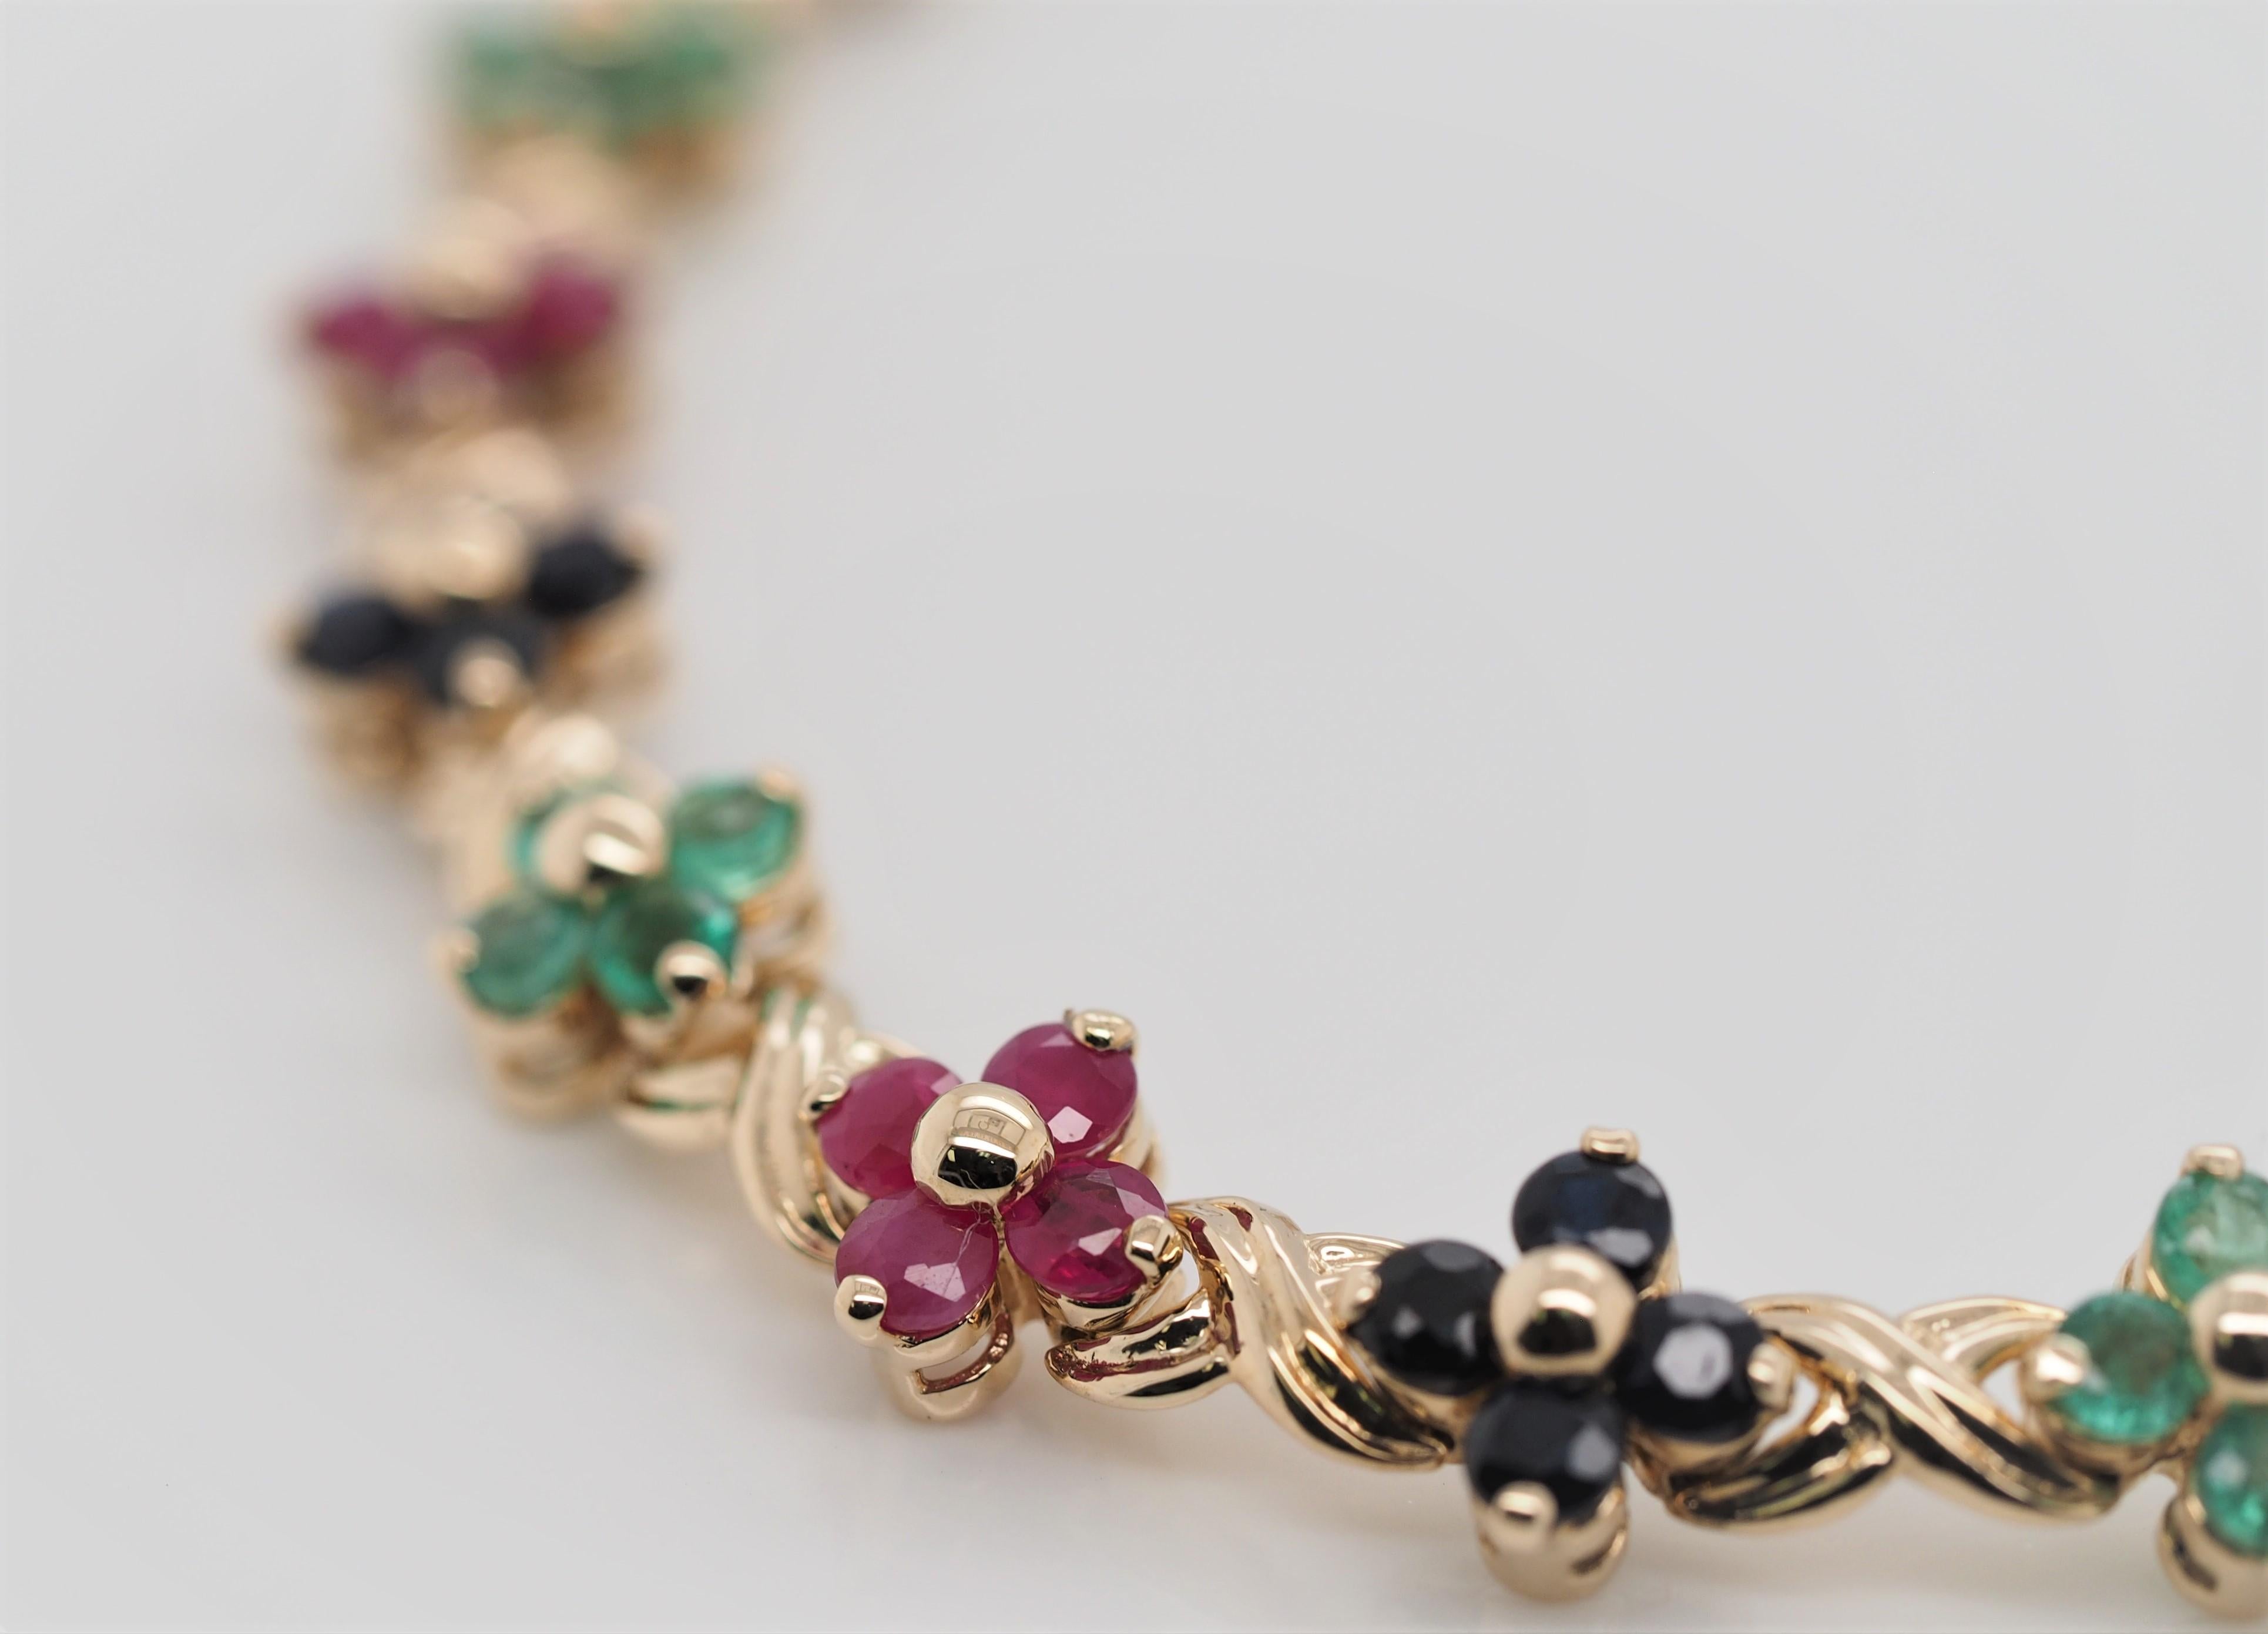 14 karat yellow gold flowers link bracelet with Blue sapphires, Red Rubies and Green Emeralds.
The bracelet is 7